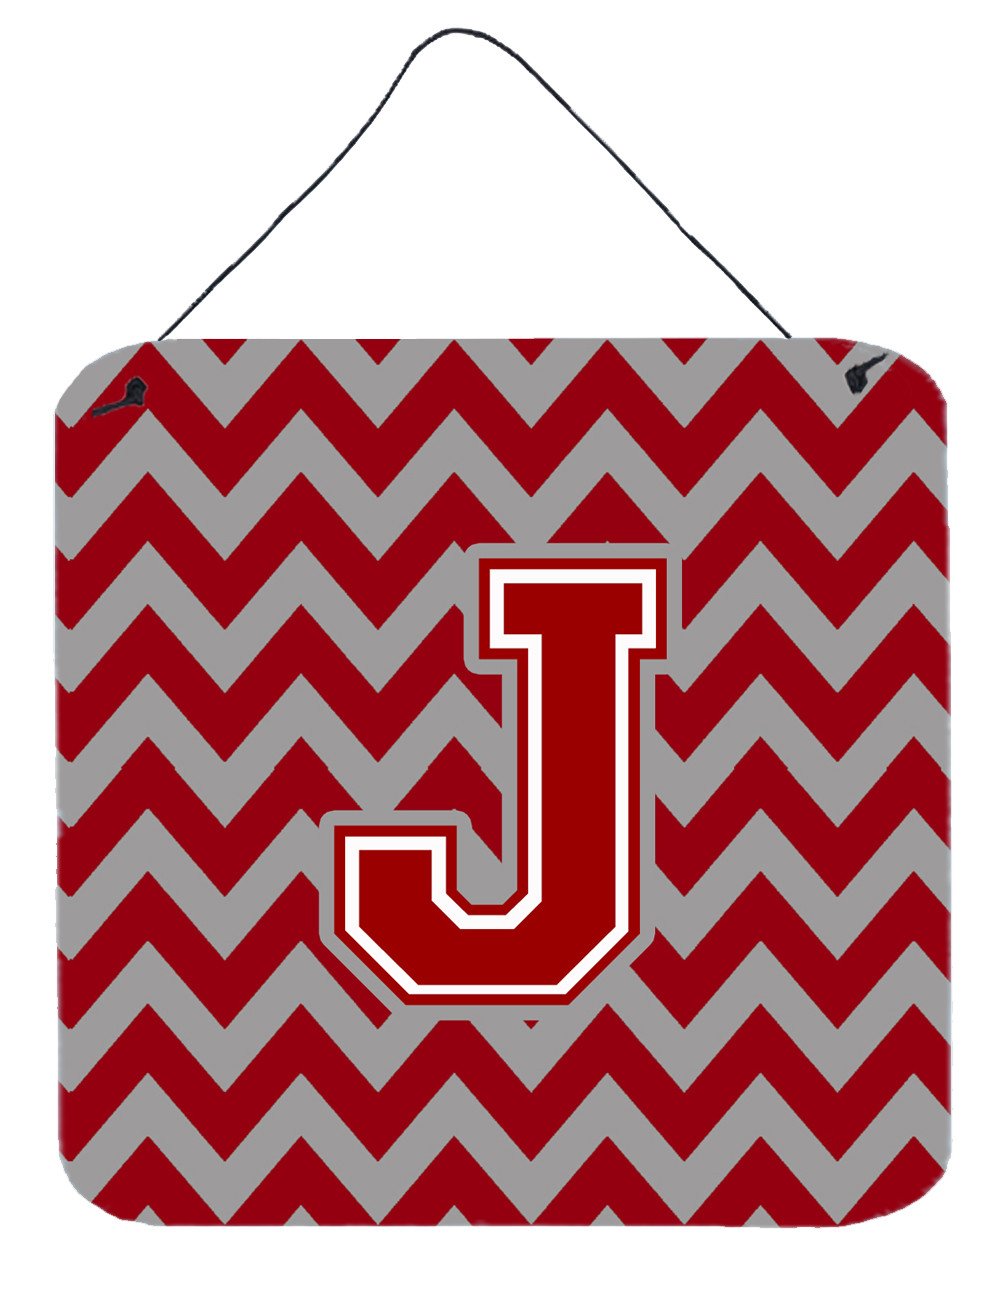 Letter J Chevron Maroon and White Wall or Door Hanging Prints CJ1049-JDS66 by Caroline's Treasures